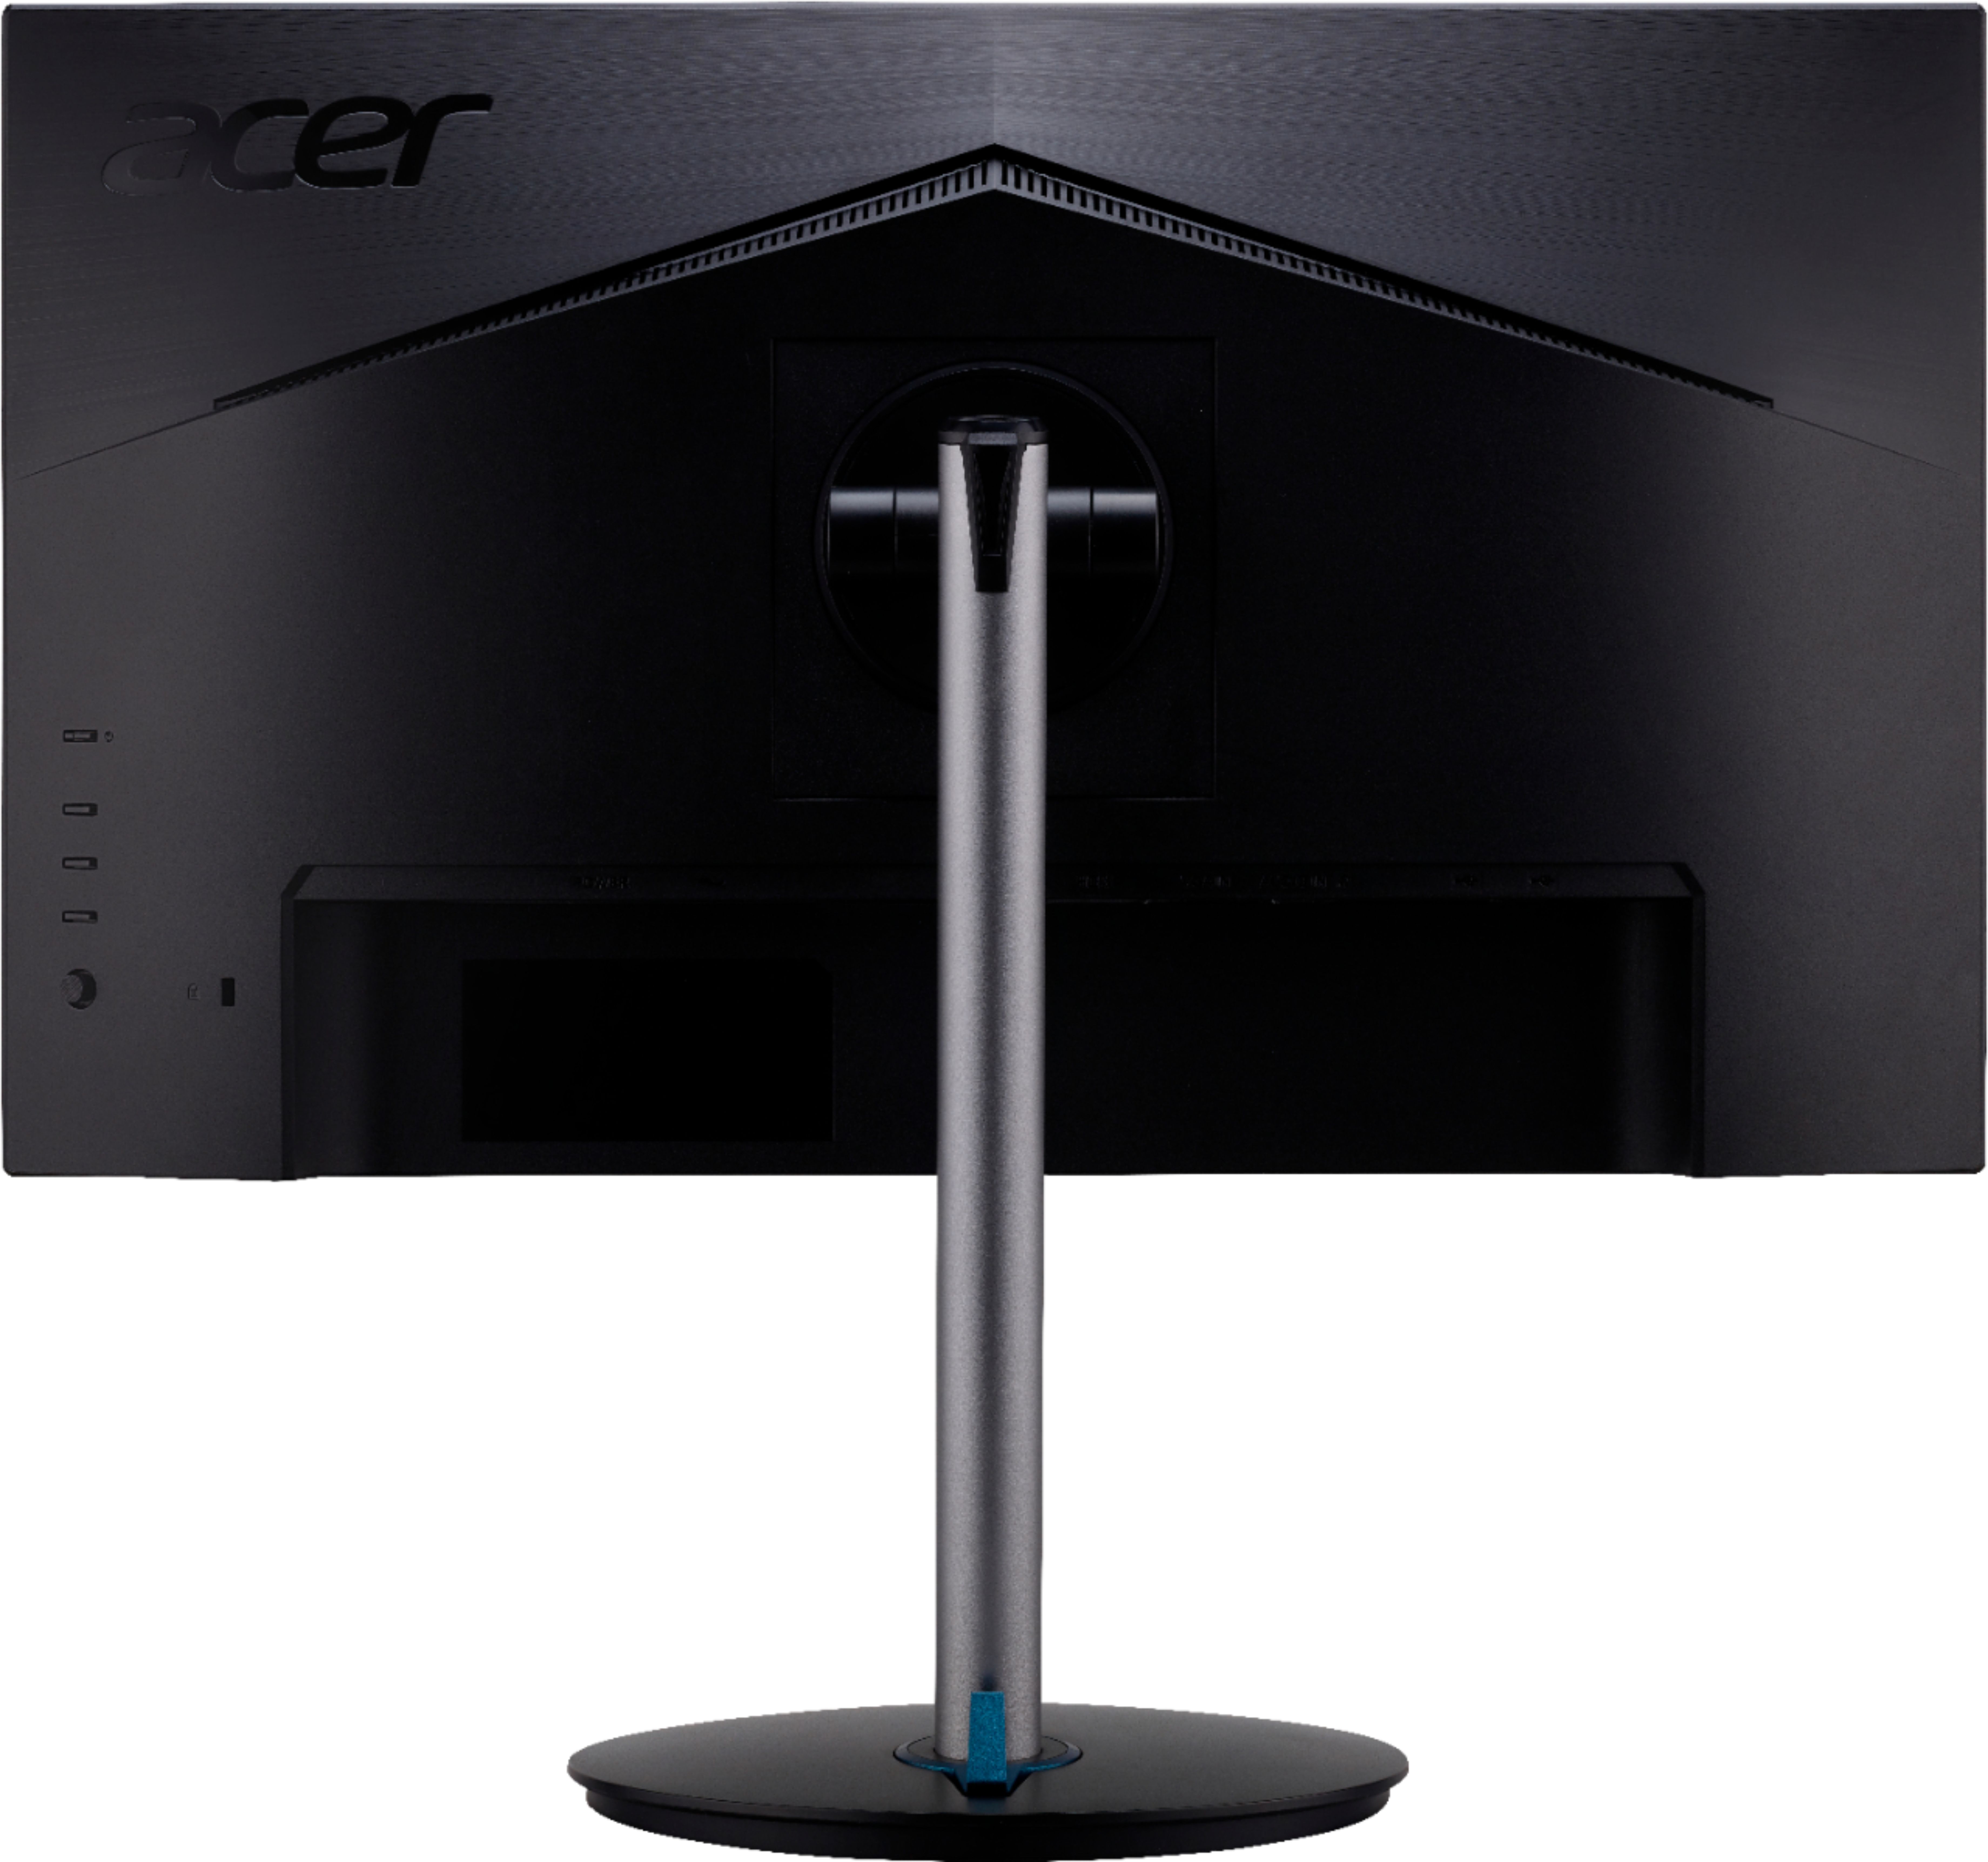 Back View: Anker - Charging Dock with Rechargeable Batteries for Meta Quest 2 VR Headset and Controllers - White